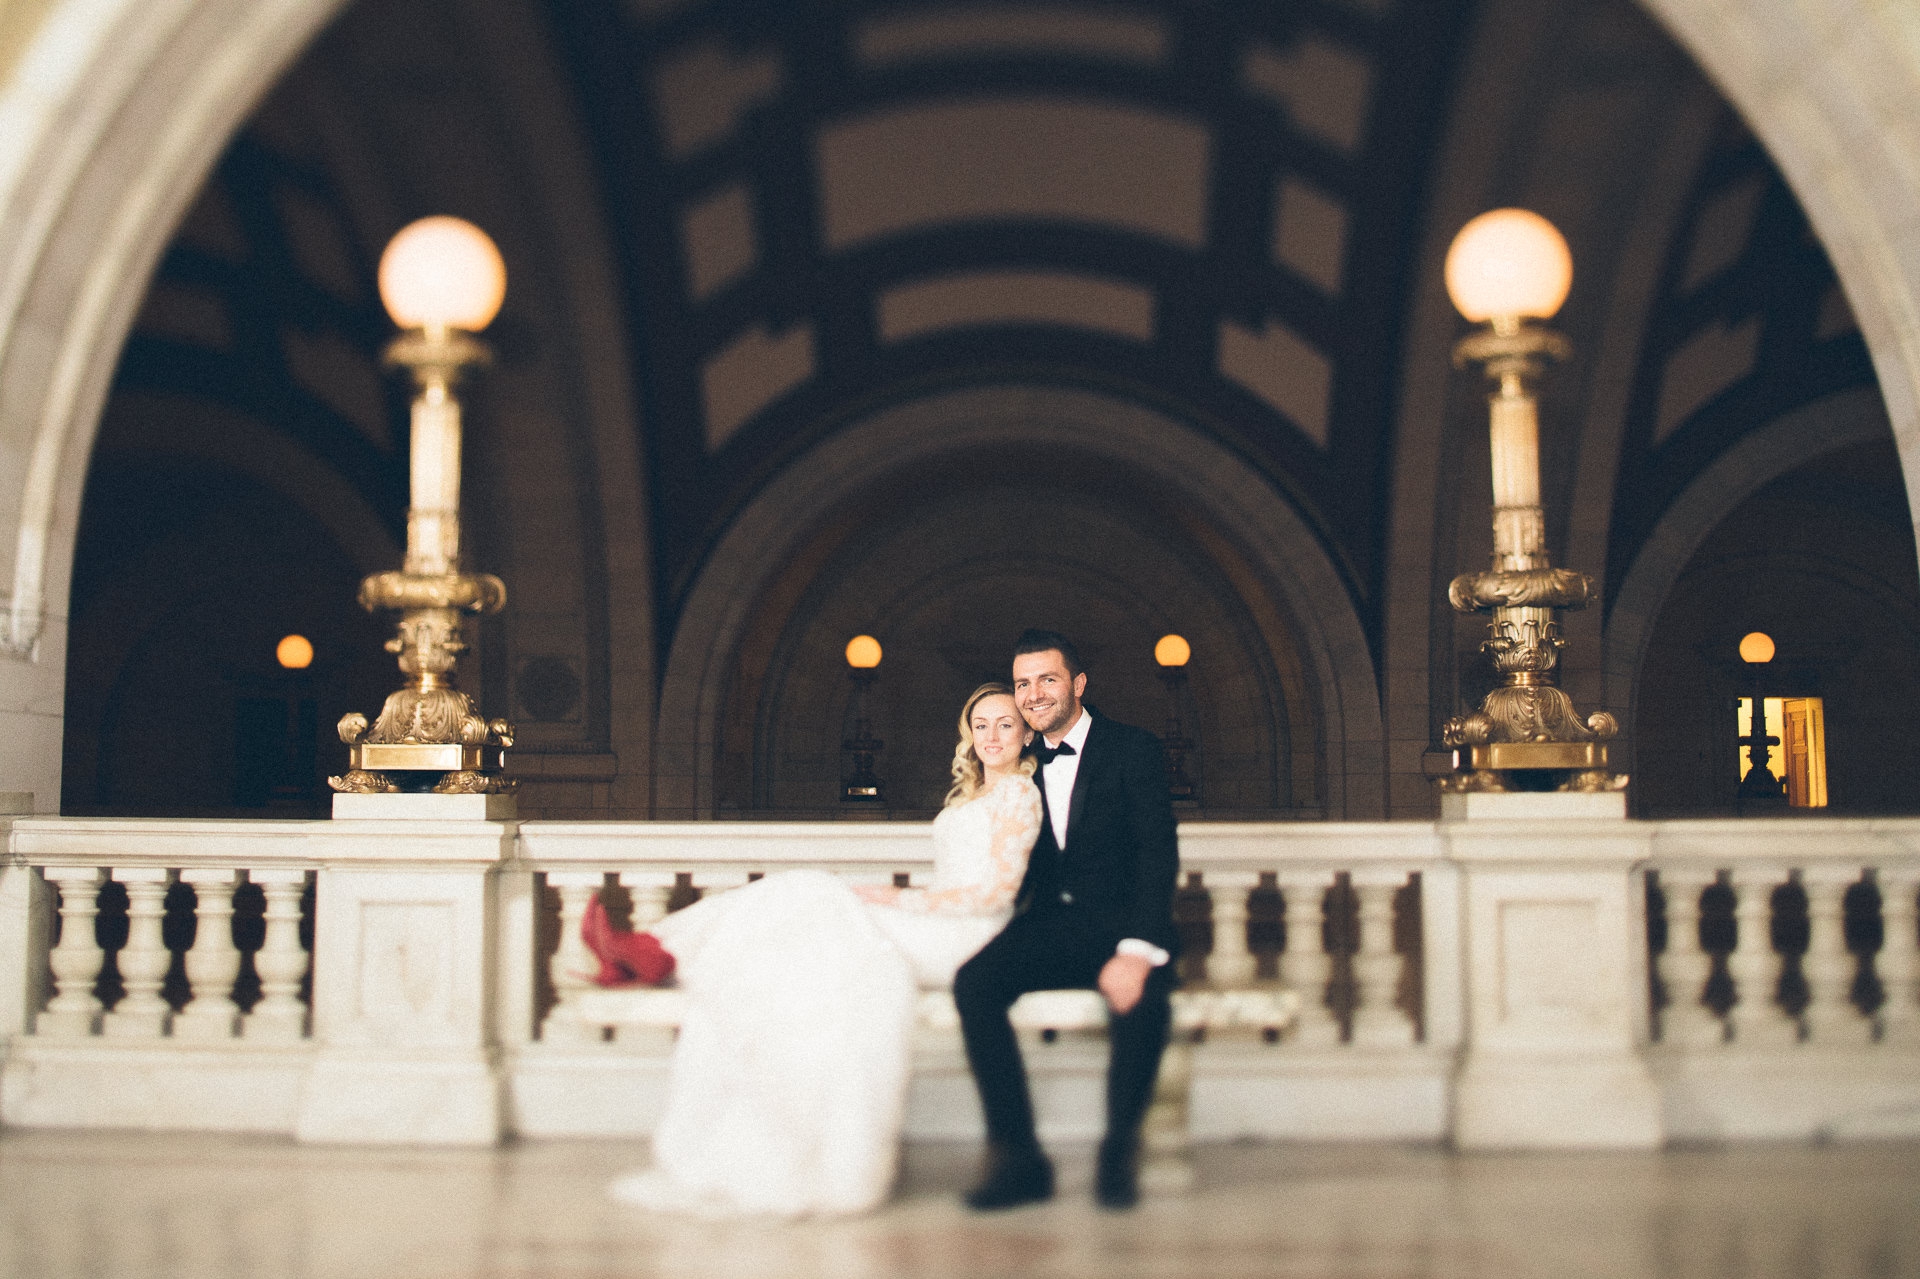 Old Courthouse Wedding Photographers in Cleveland with A Taste of Excellence 61.jpg